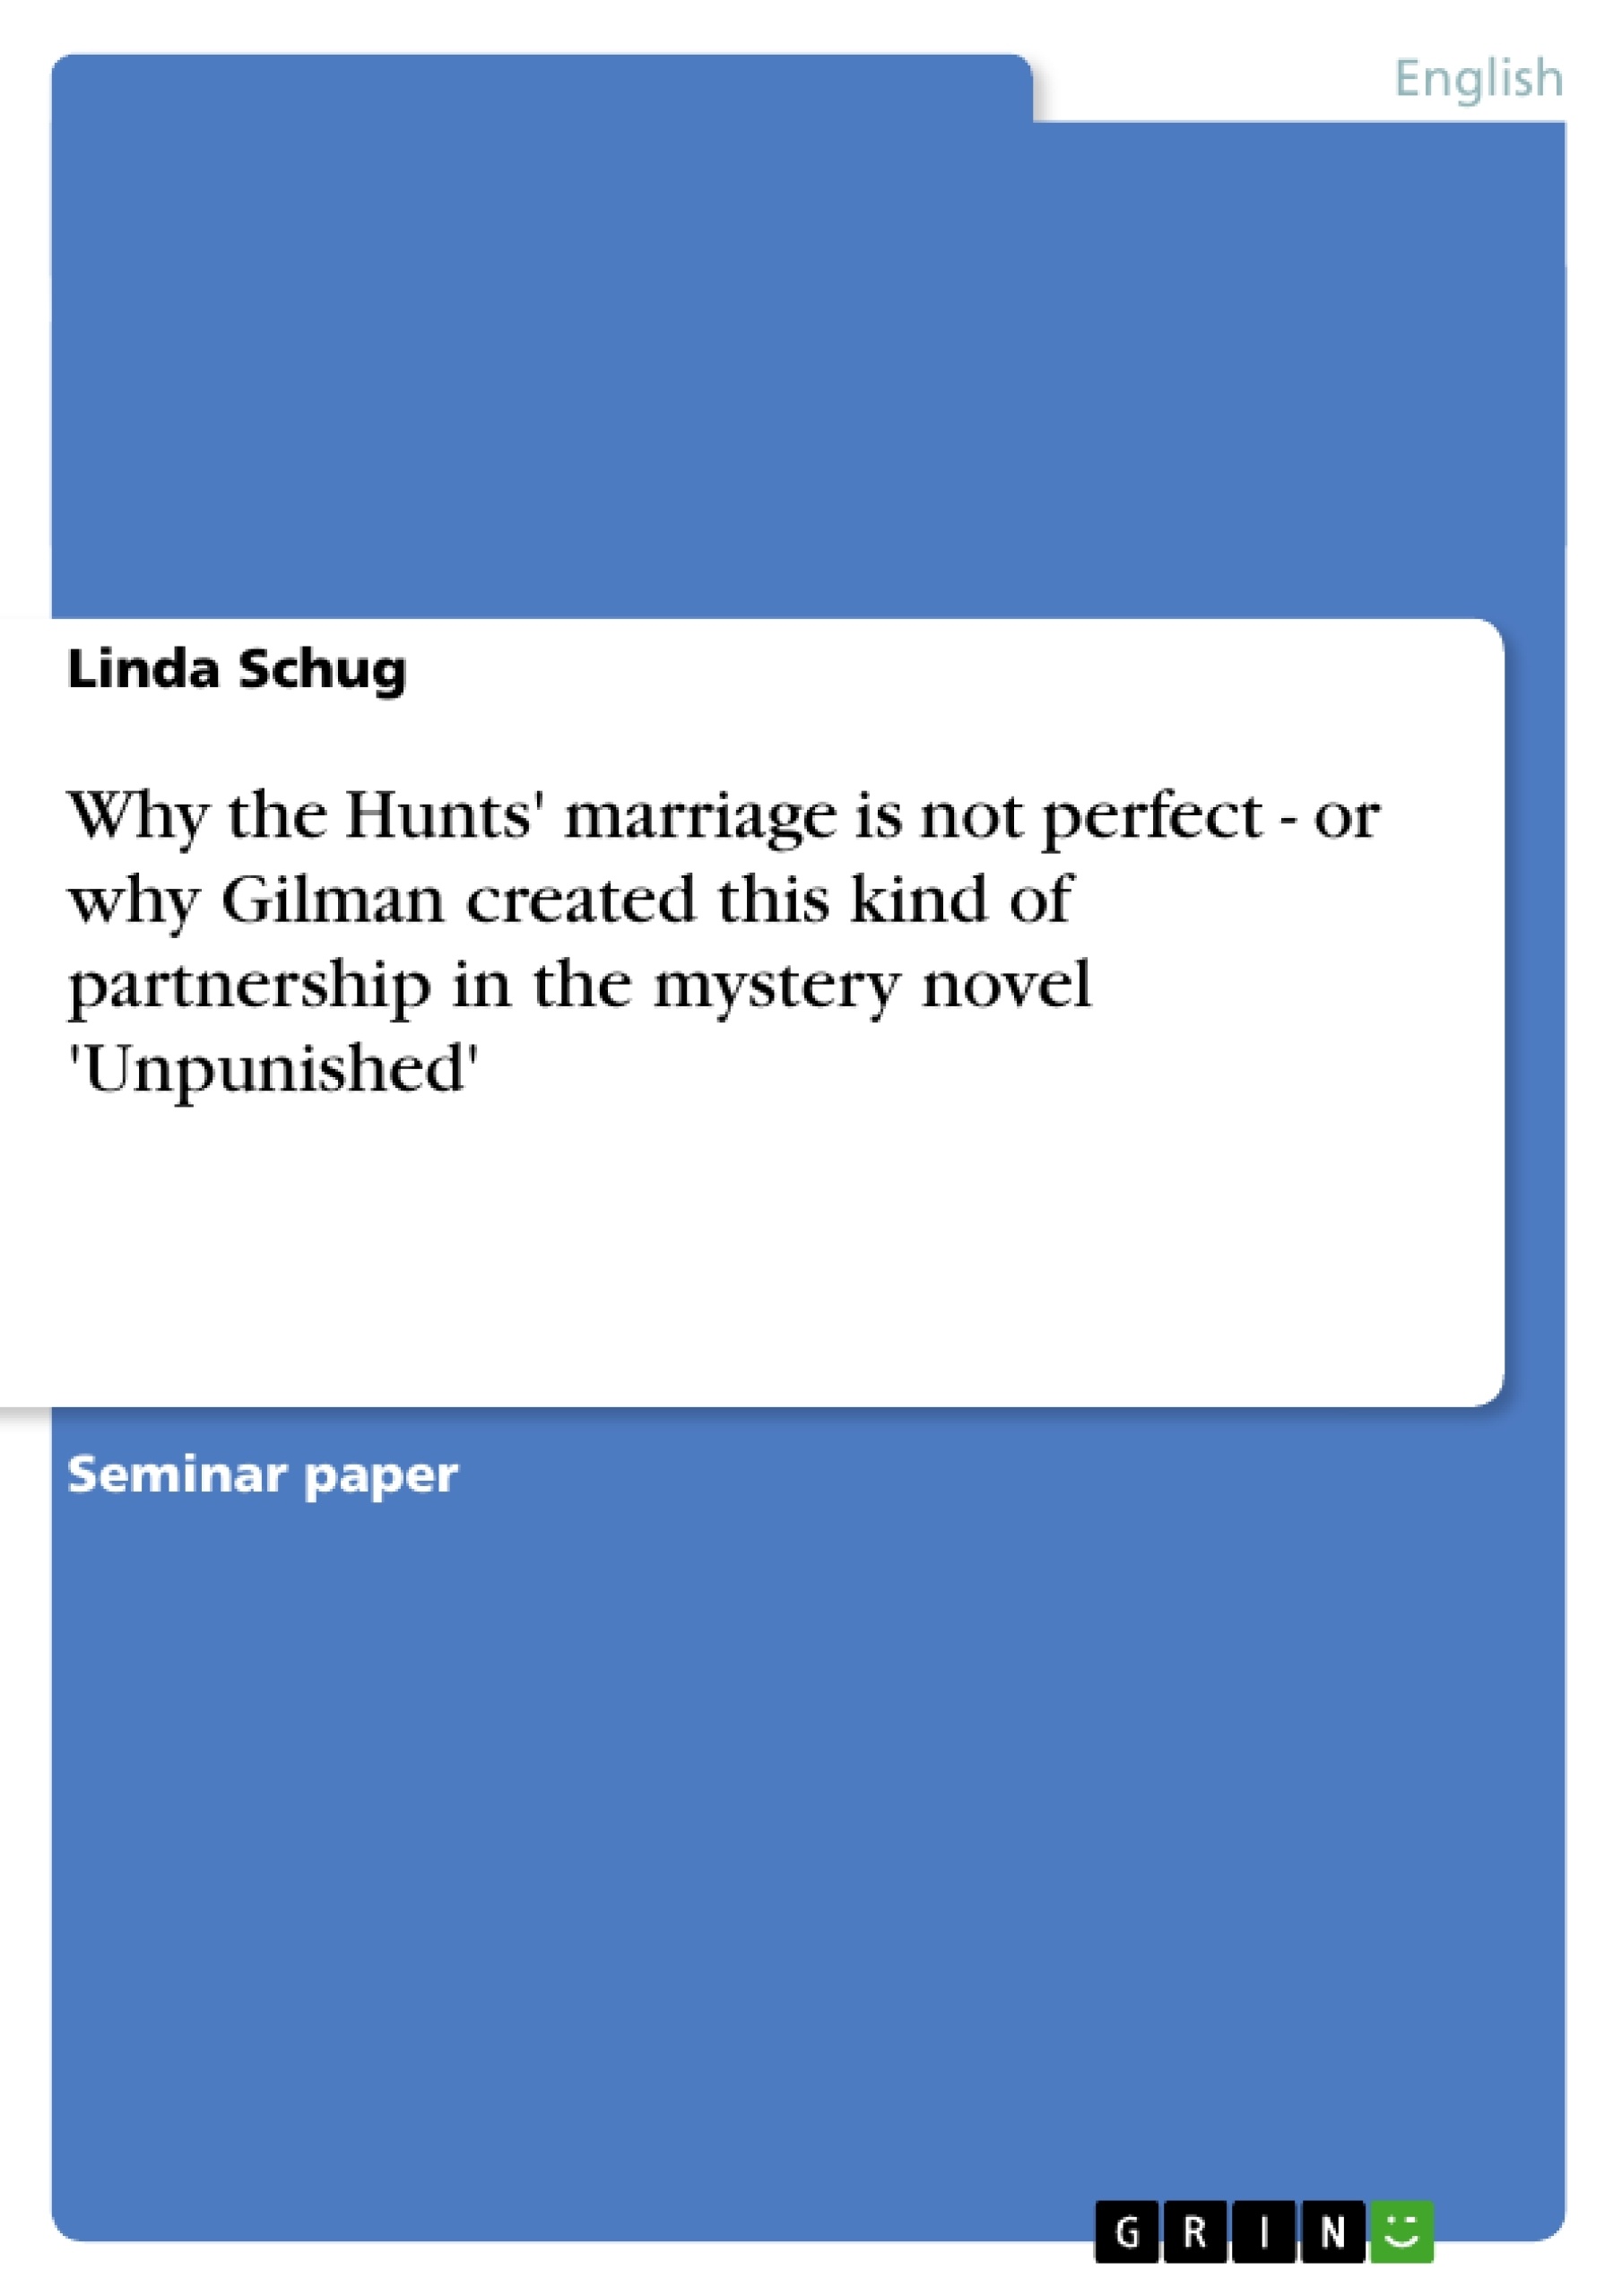 Título: Why the Hunts' marriage is not perfect - or why Gilman created this kind of partnership in the mystery novel 'Unpunished'